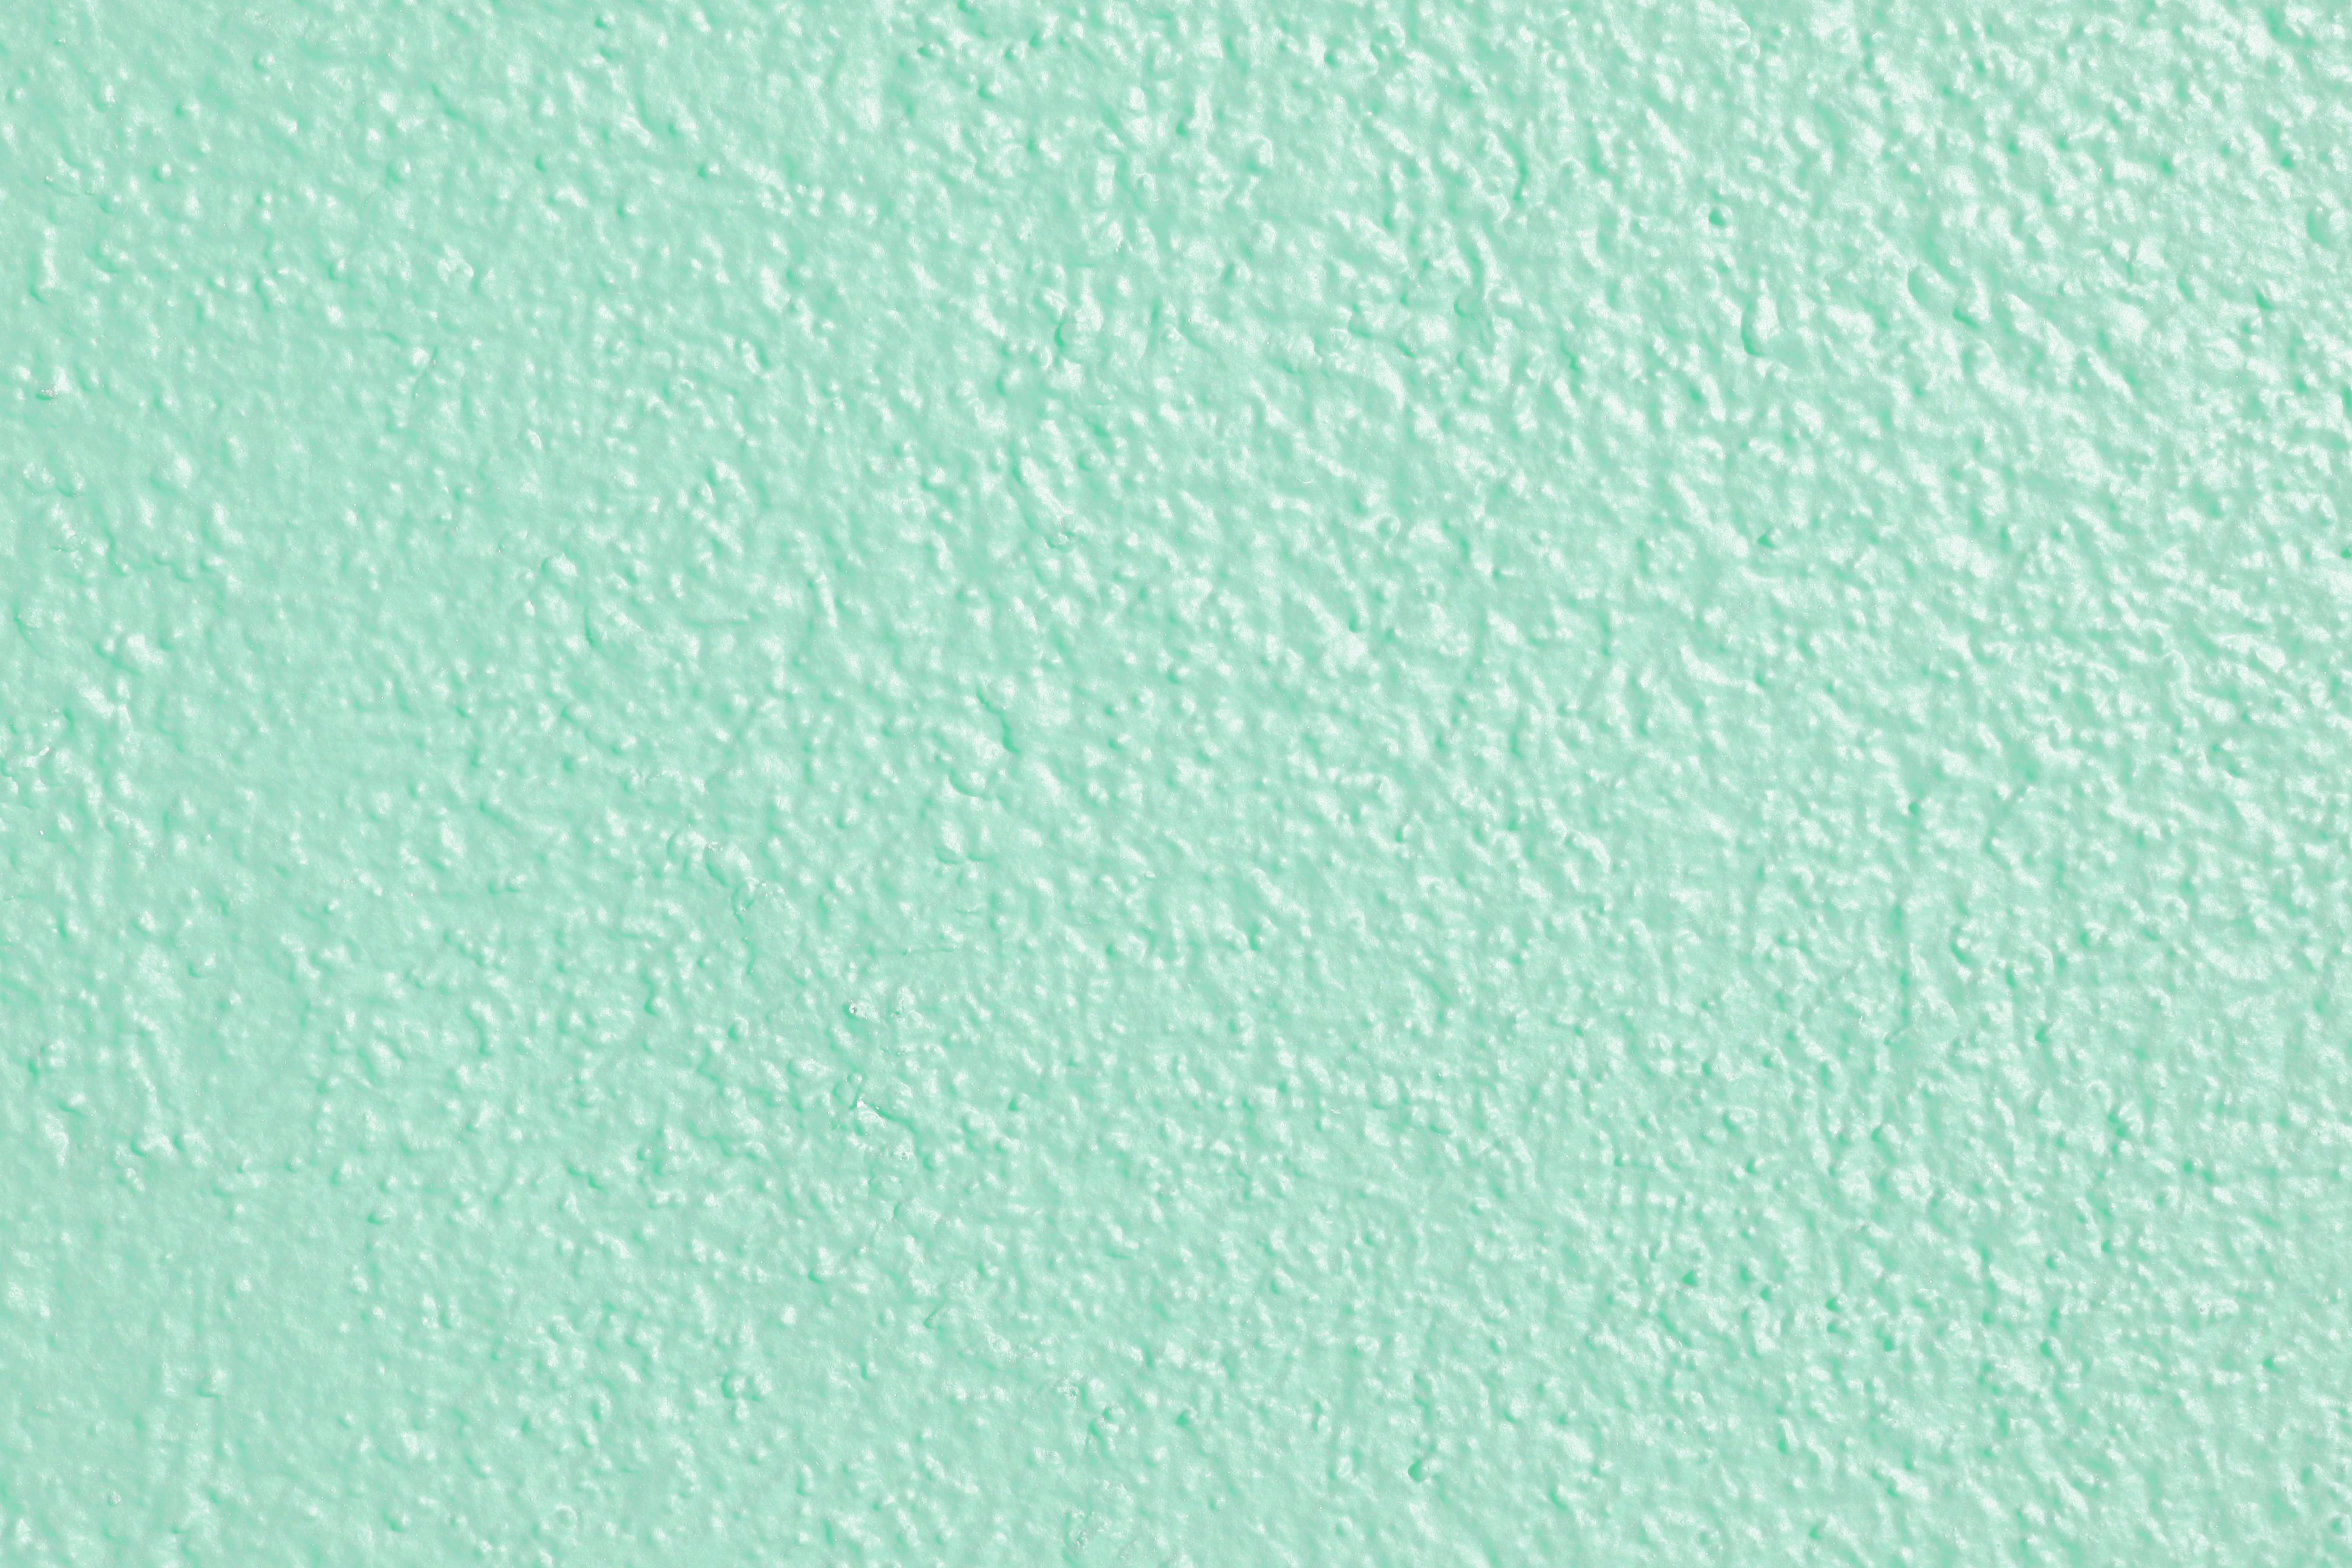 Mint Green Painted Wall Texture Picture Photograph Photos